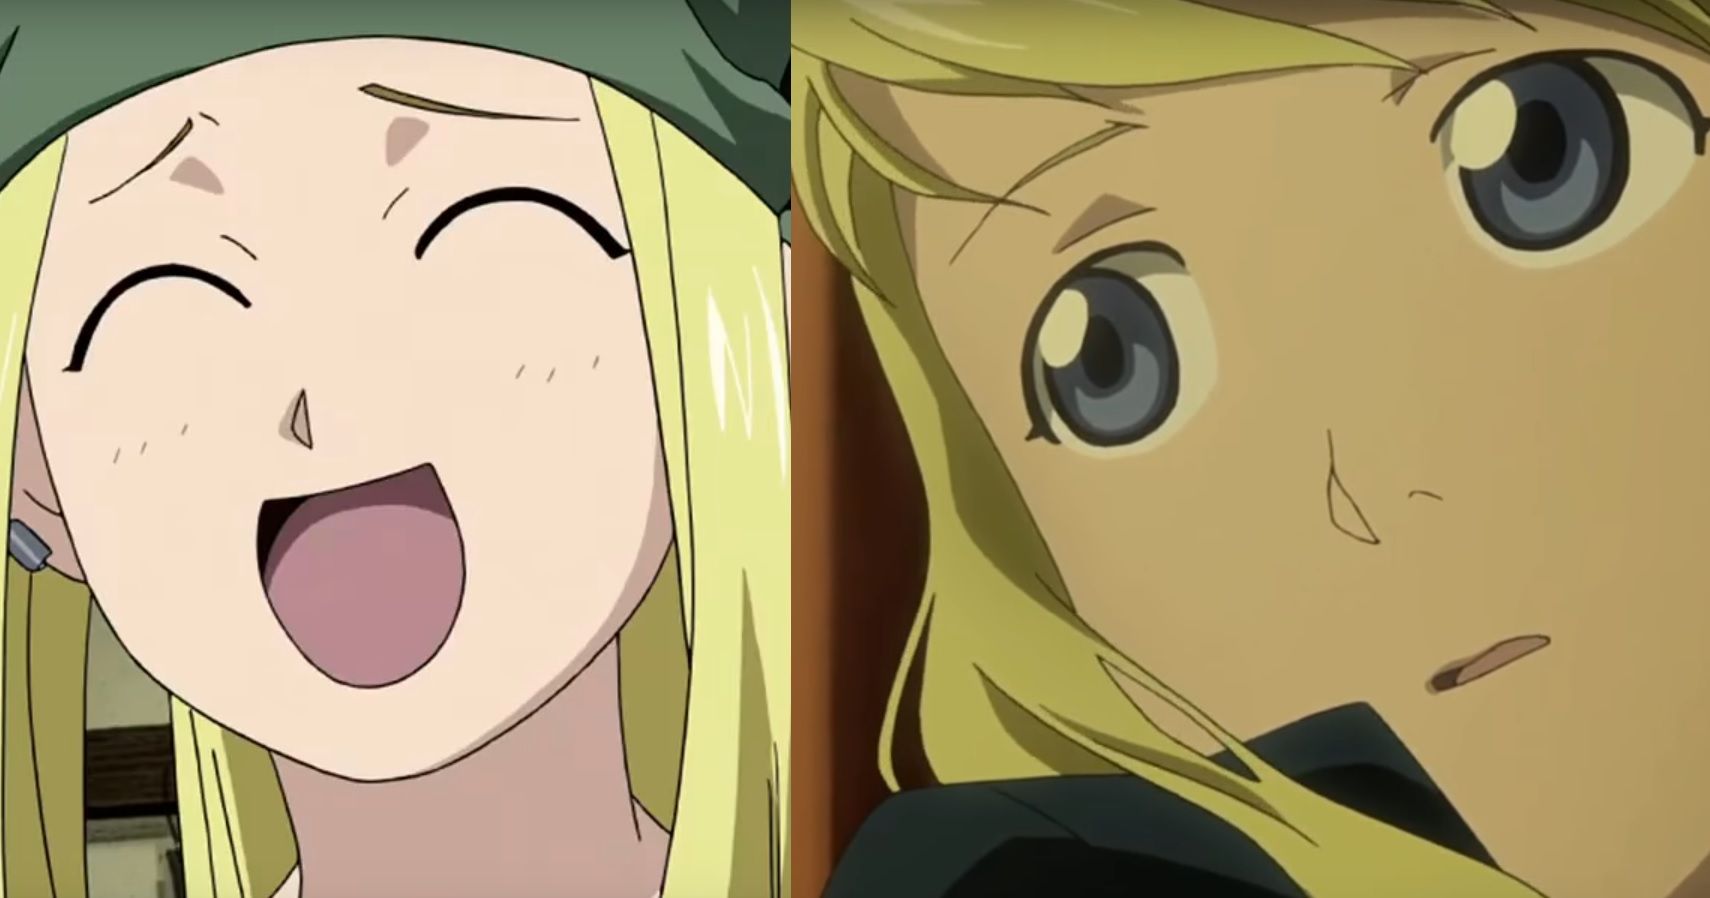 Pin on winry rockbell